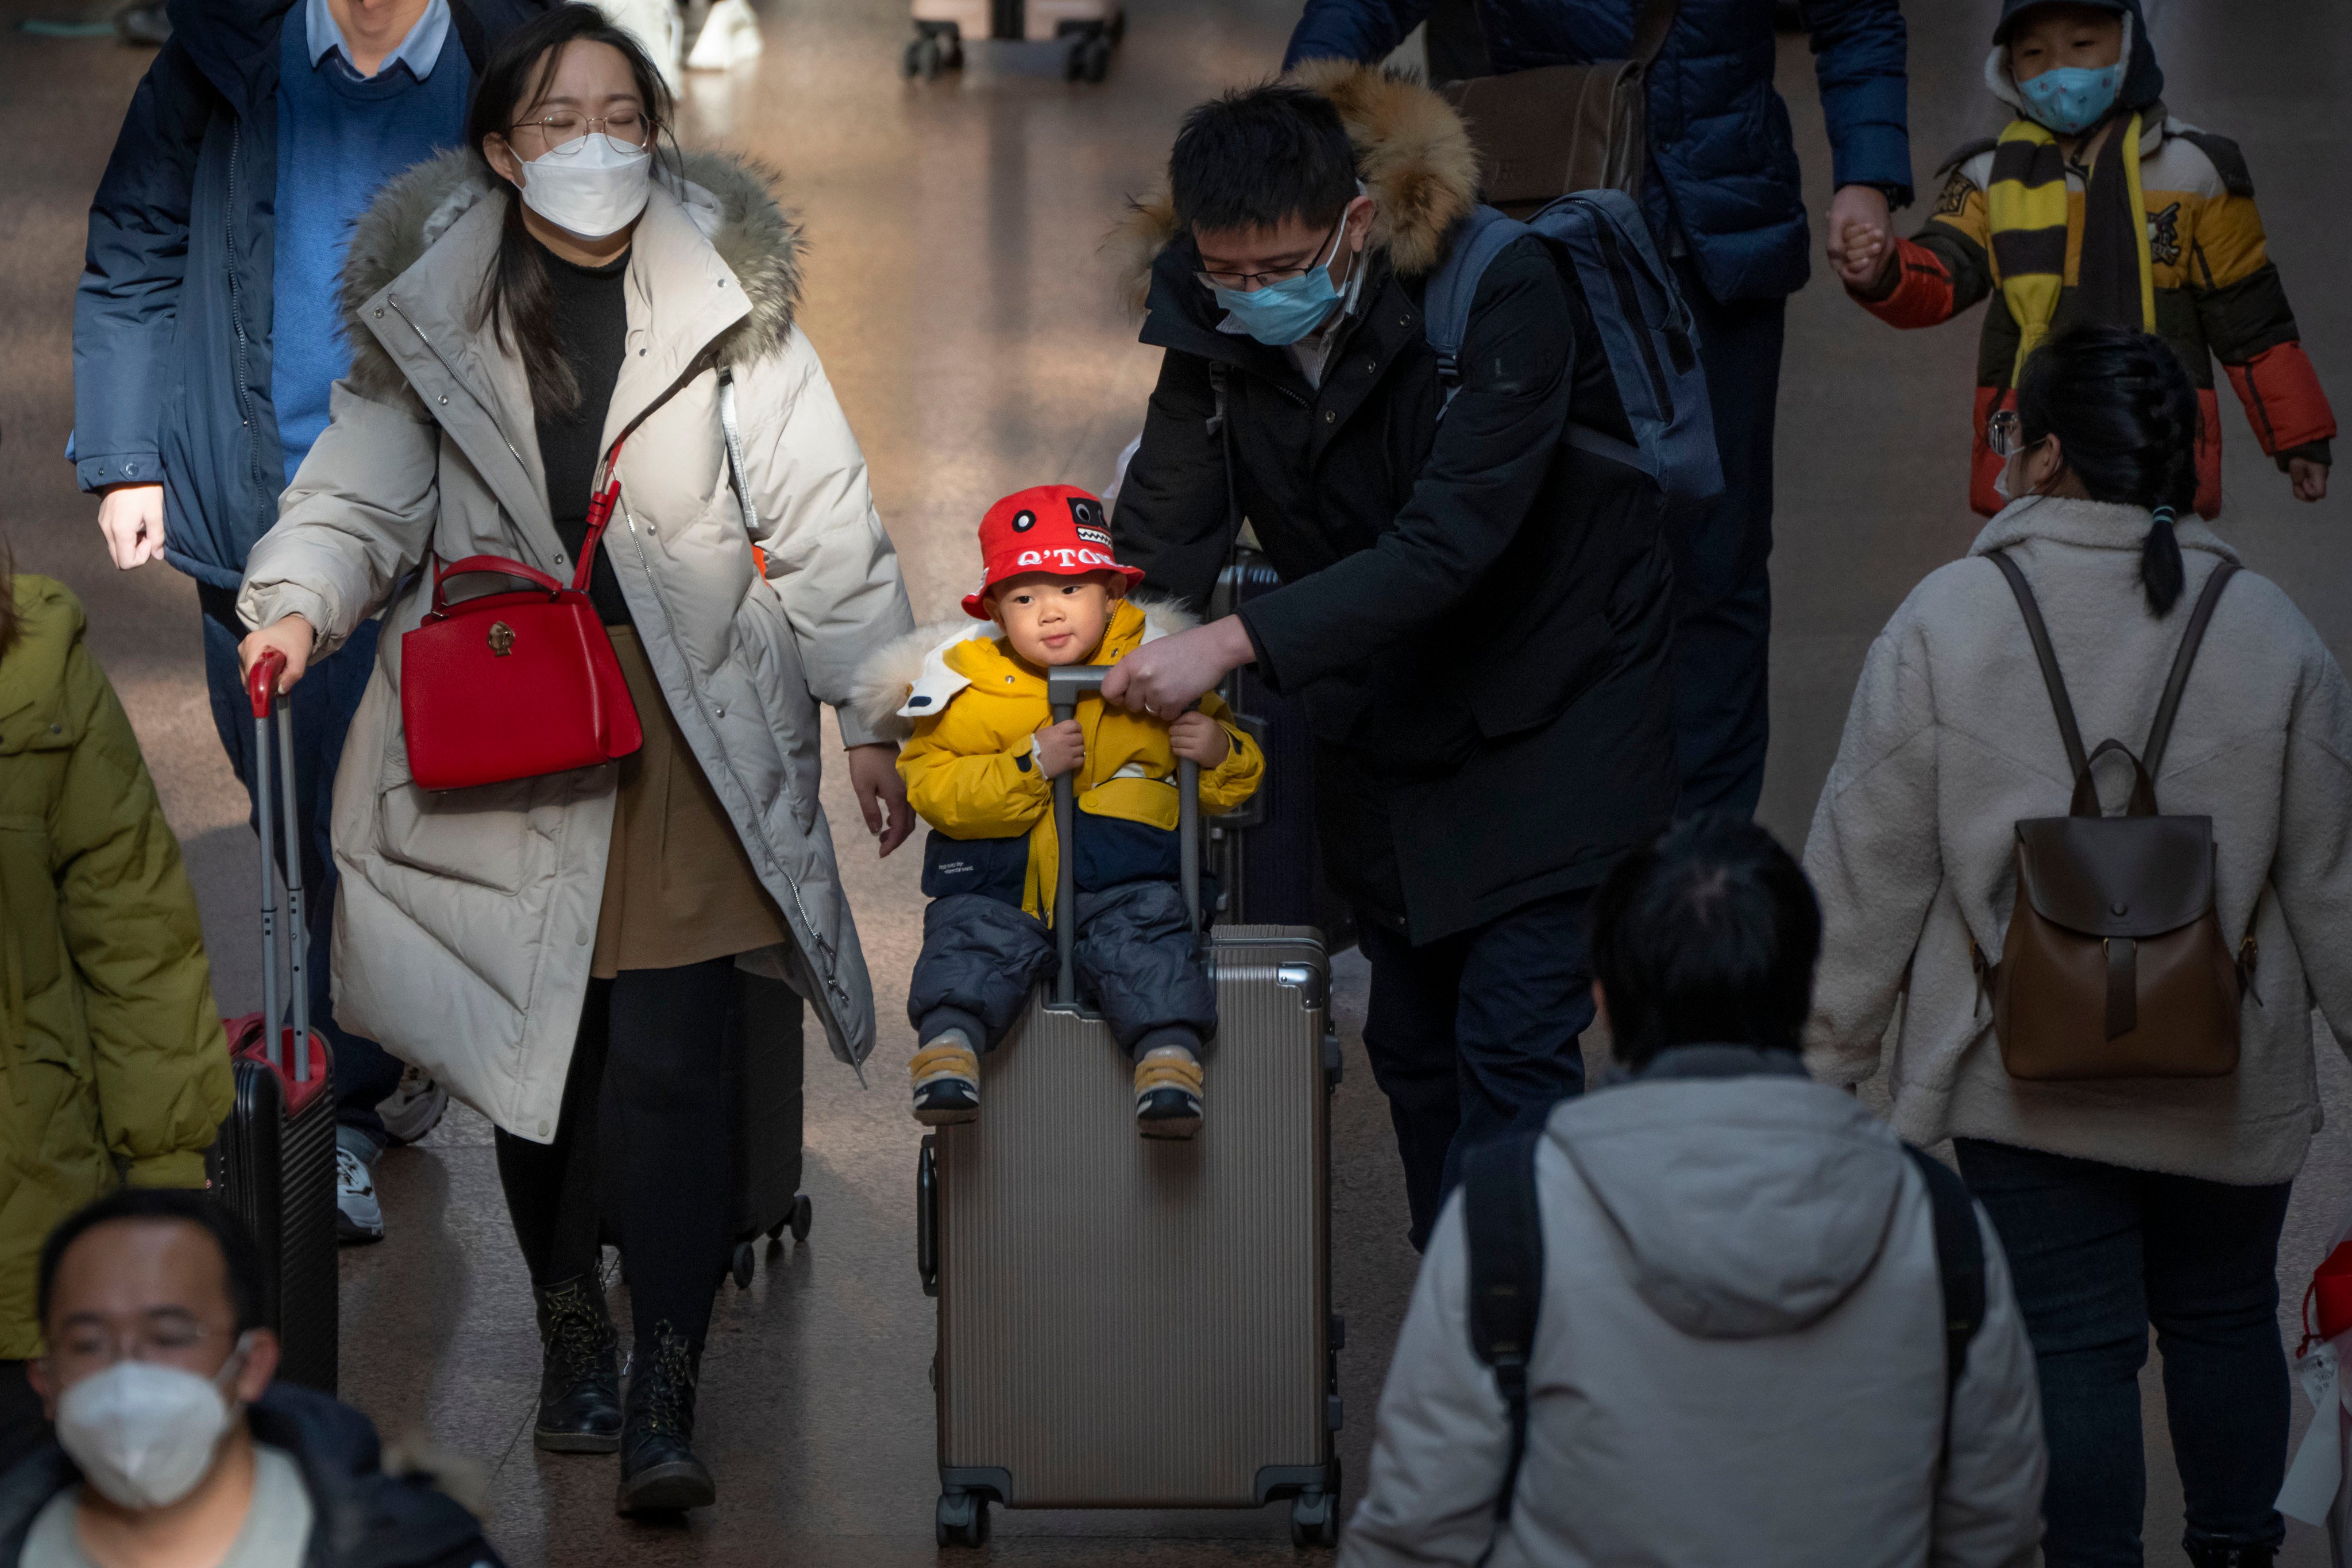 A man pushes a child riding on a suitcase at Beijing West Railway Station in Beijing on January 18. A population that has crested and is slowly shrinking will pose new challenges for China’s leaders, ranging from encouraging young people to start families to persuading seniors to stay in the workforce longer and parents to allow their children to join the military. Photo: AP